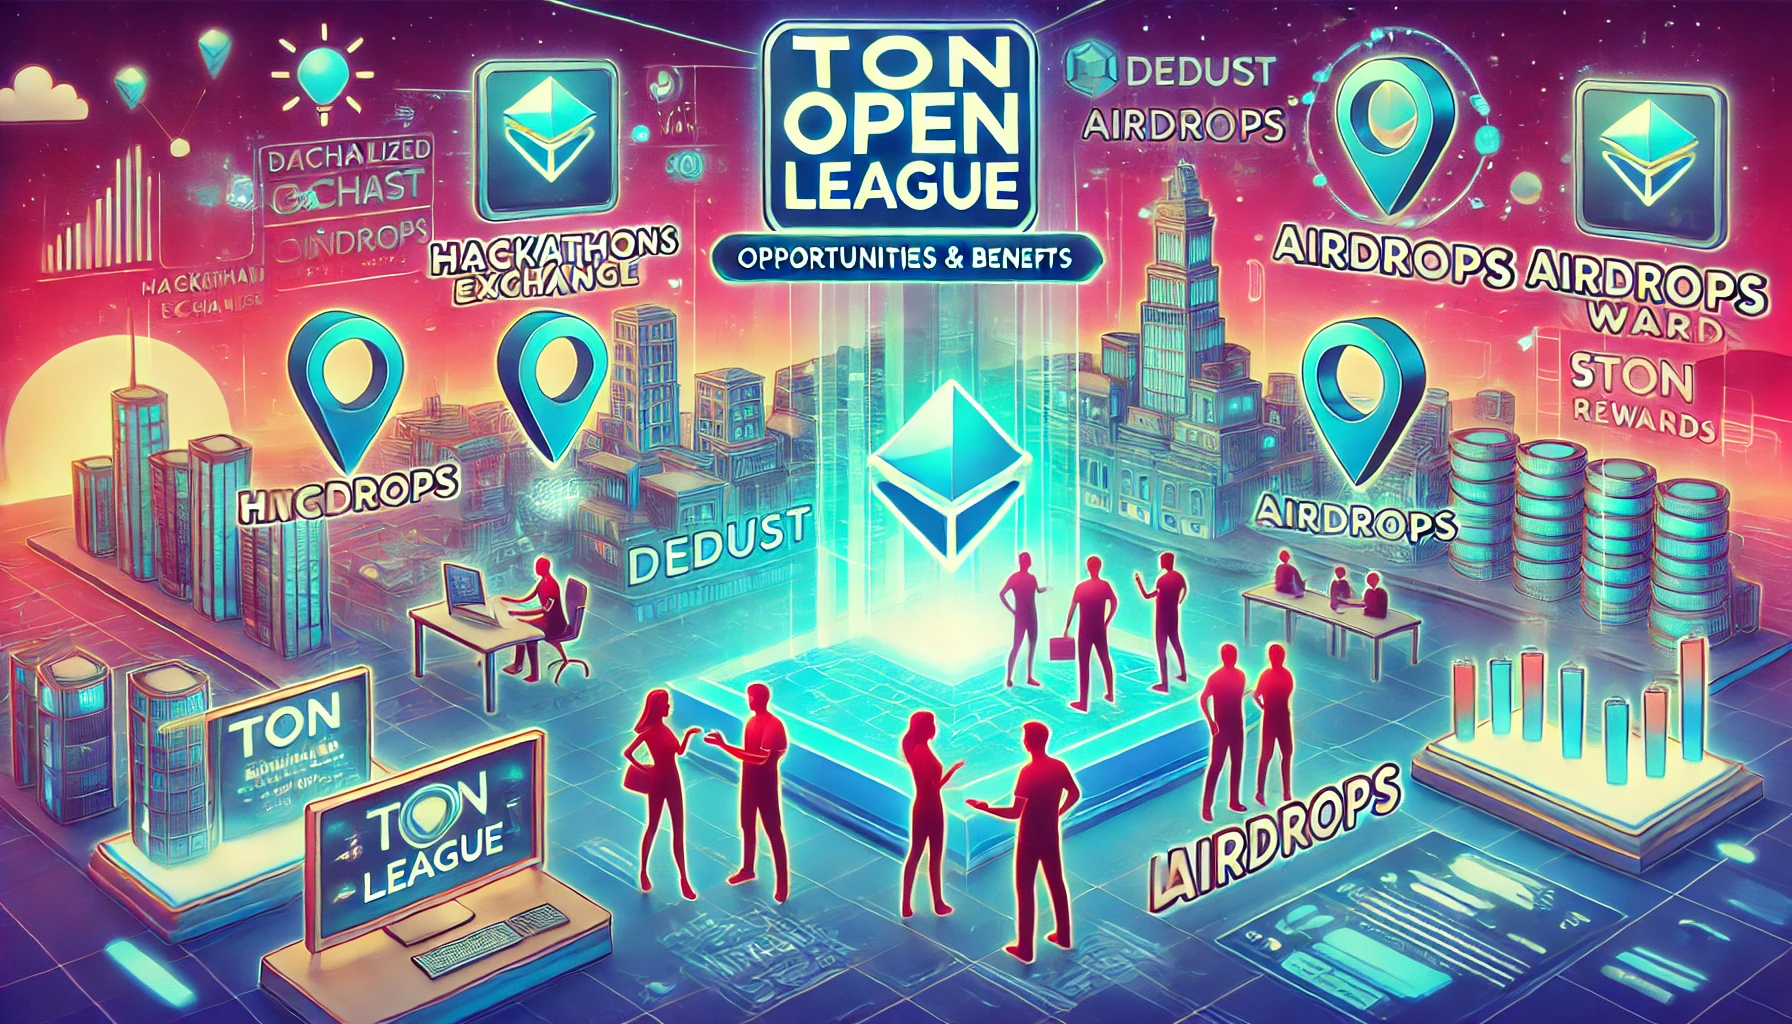 Ton Open League: Opportunities and Benefits - news